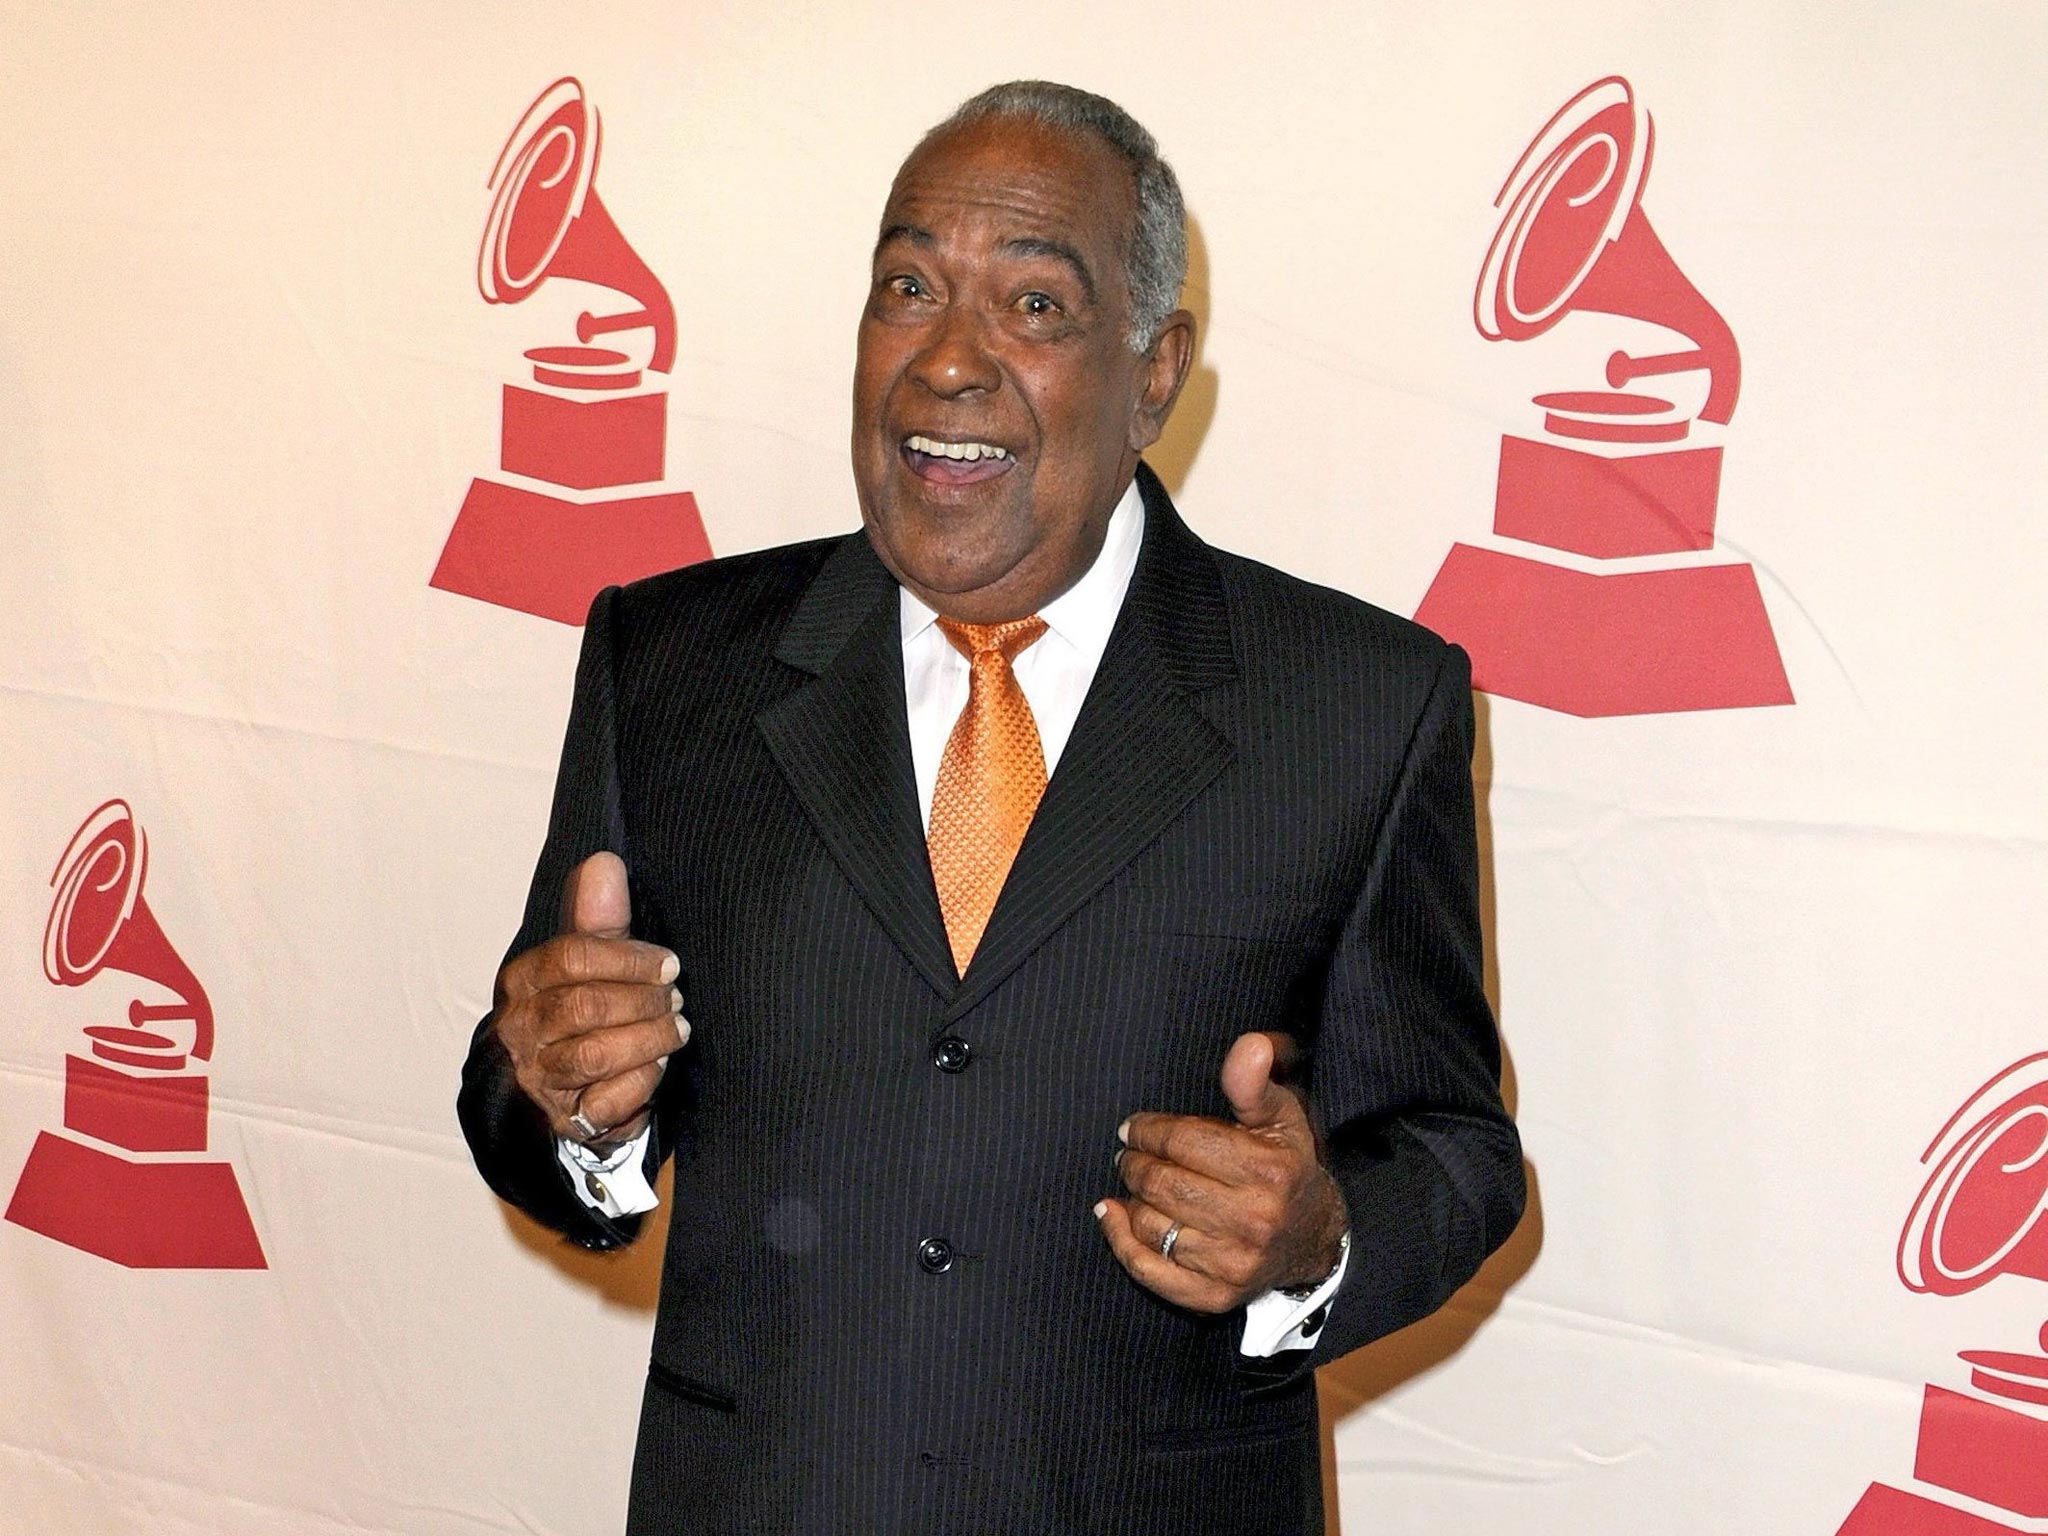 Feliciano in 2008, about to receive a Lifetime Achievement Award from the Latin
Recording Academy